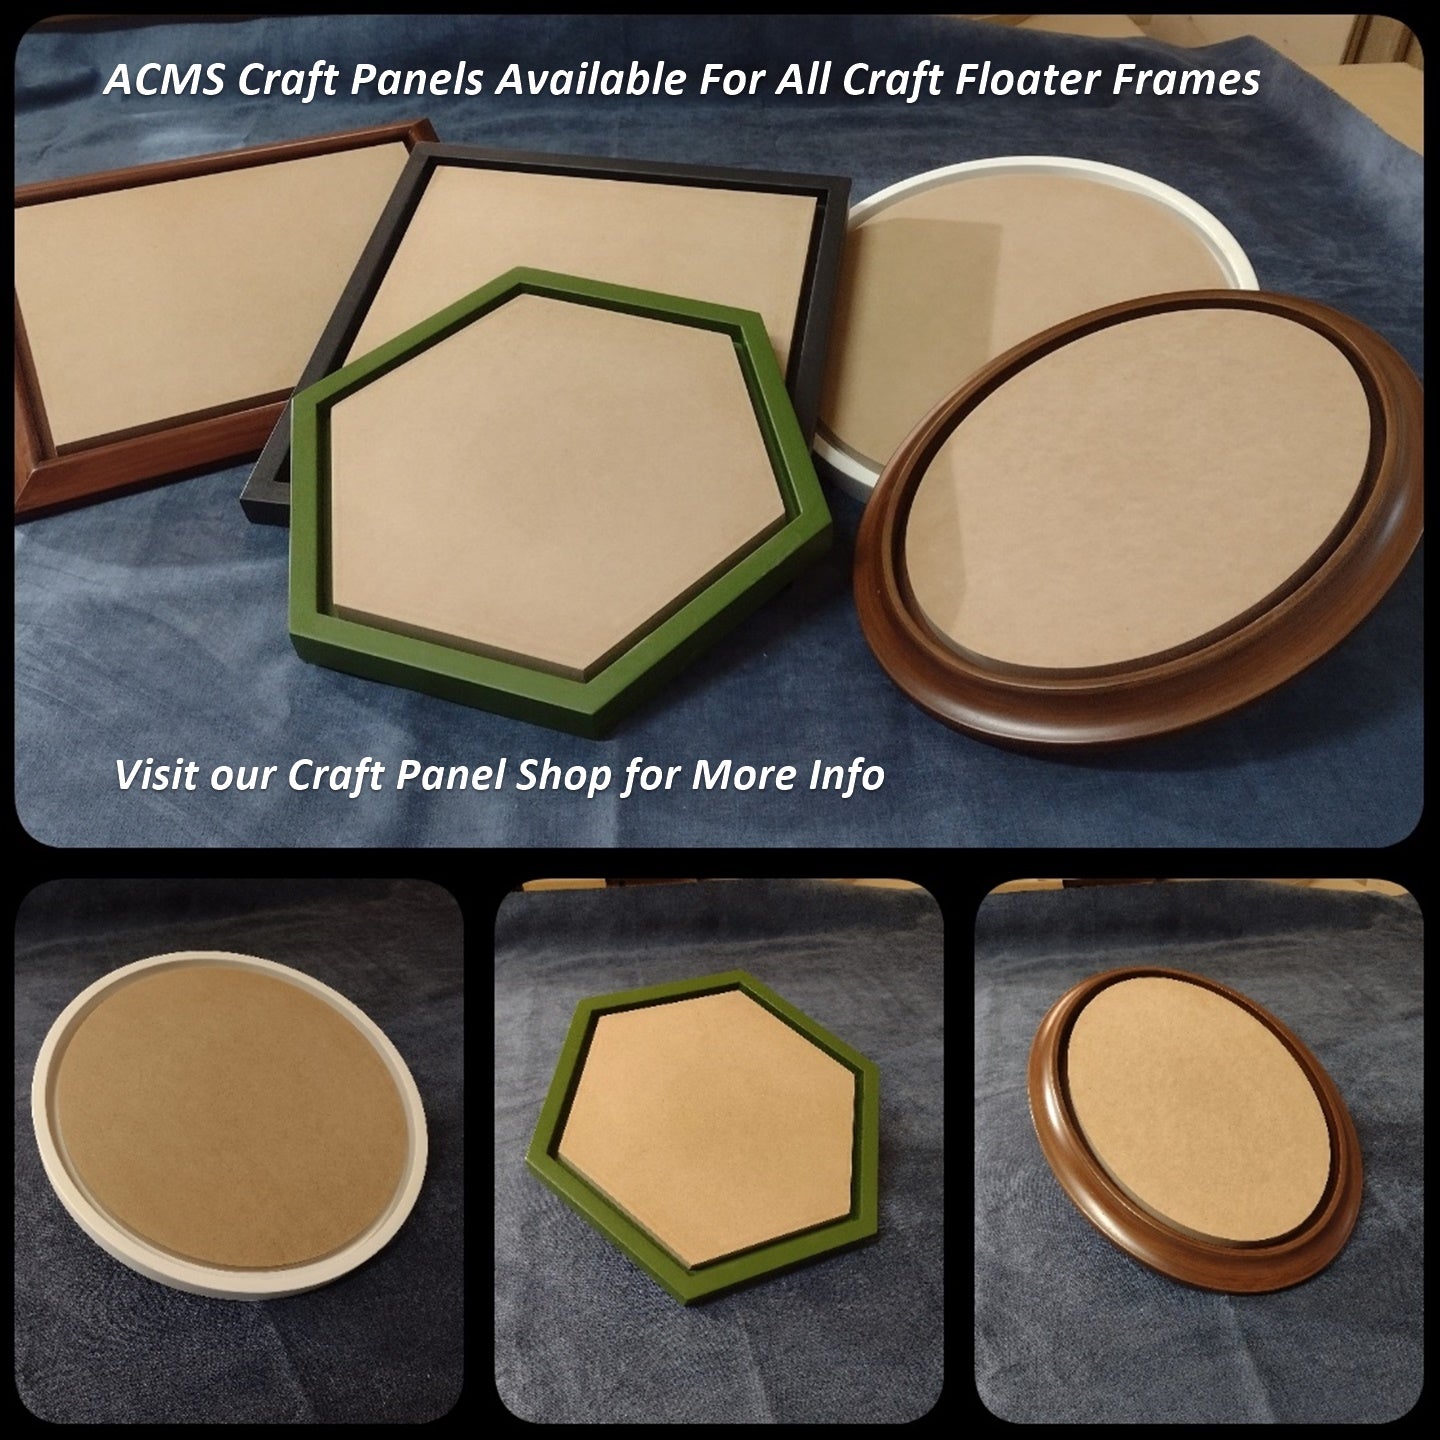 Round Craft Floater Frame - COVE 1 1/2" Profile - 1 1/4" Thick